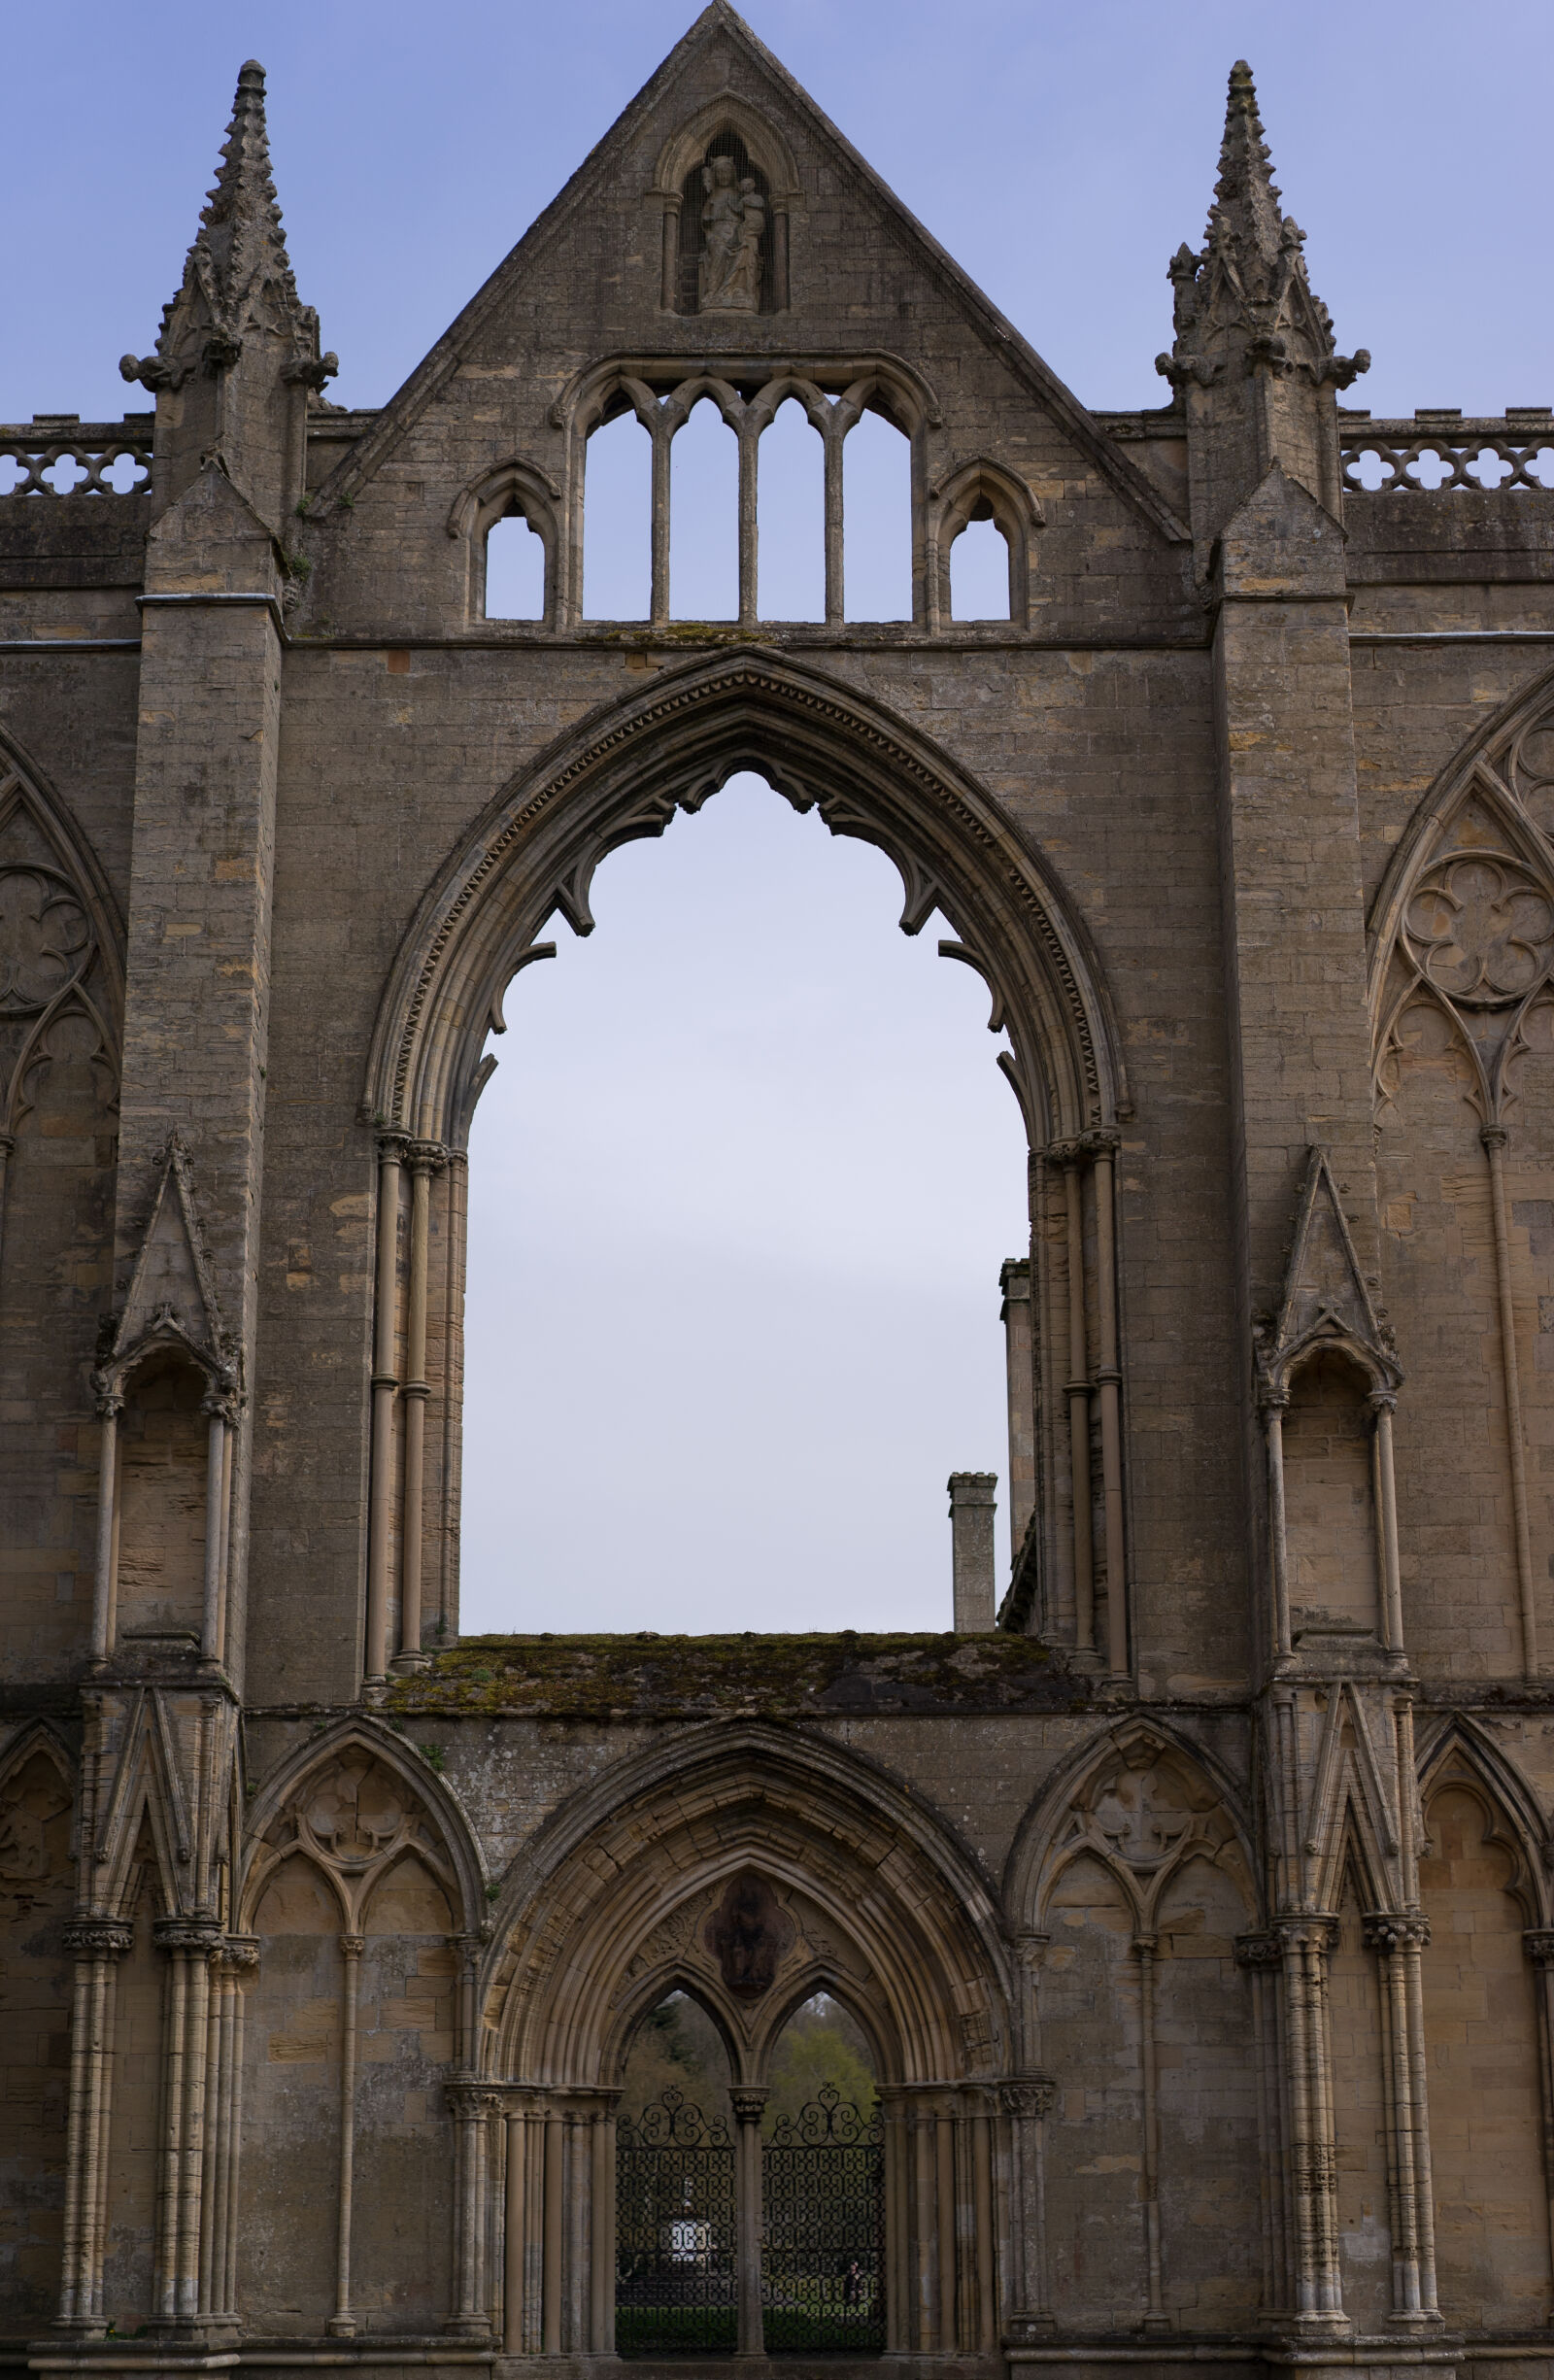 Sony a7 sample photo. Architectural, building, cathedral, historic photography